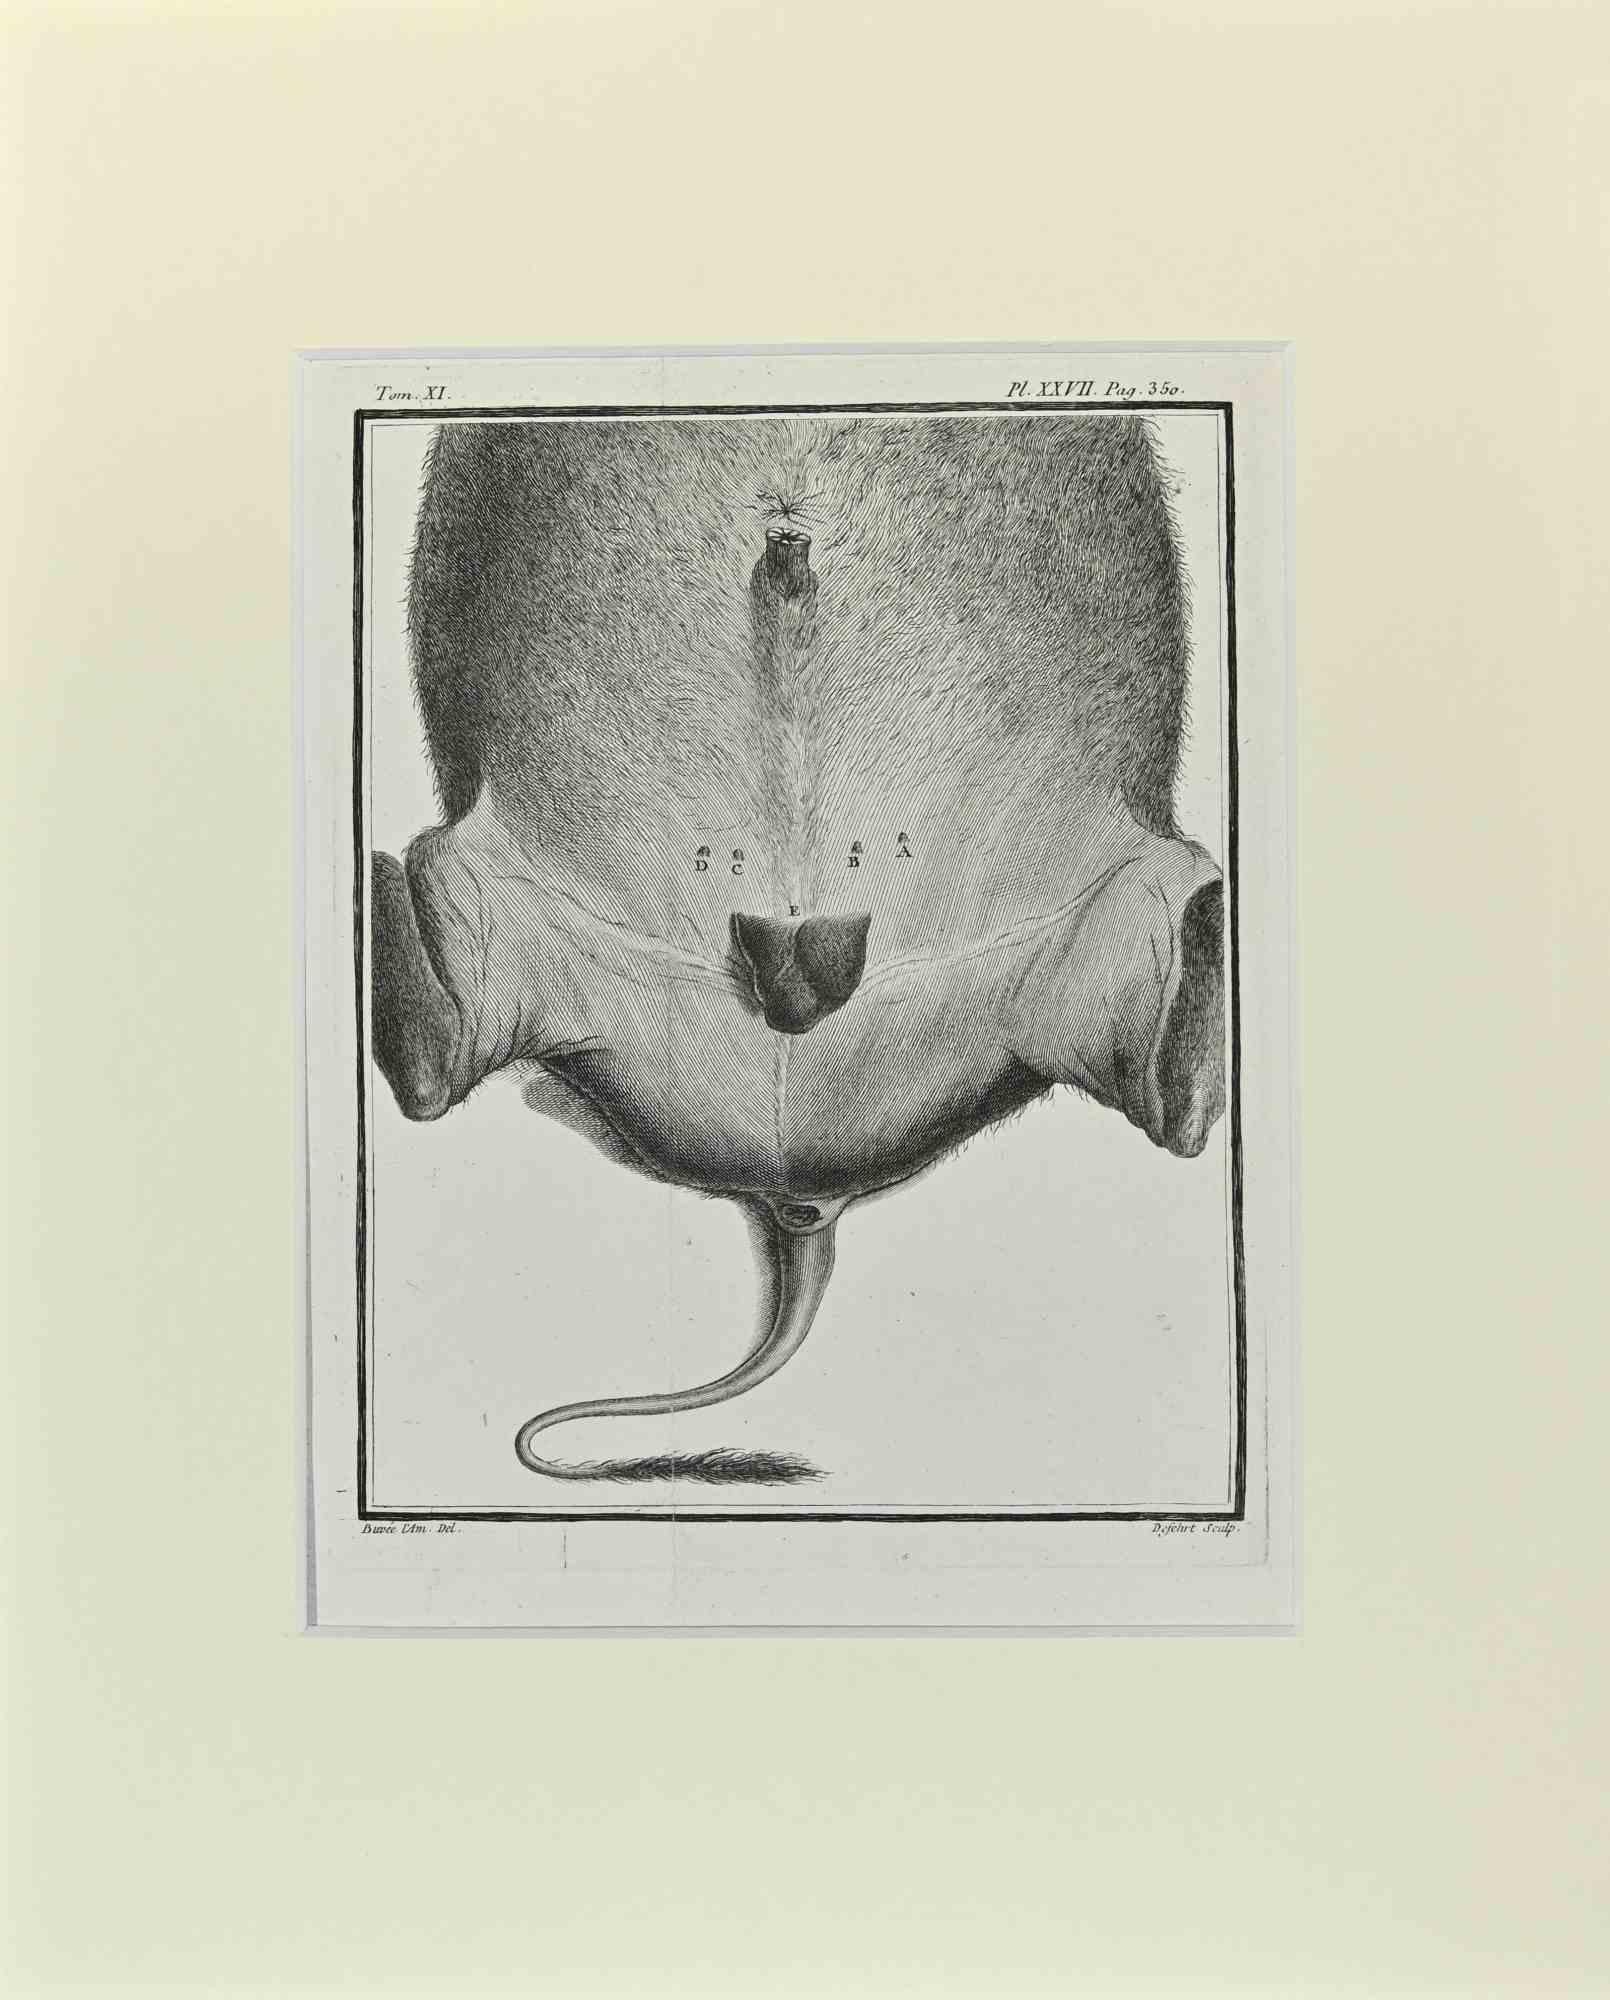 Buffalo Anatomy  is an artwork realized  by  Buvée l'Américain in 1771.  

Etching B./W. print  on ivory paper. Signed on  plate on the lower left margin.

The work is glued on cardboard. Total dimensions: 35x28 cm.

The artwork belongs to the suite